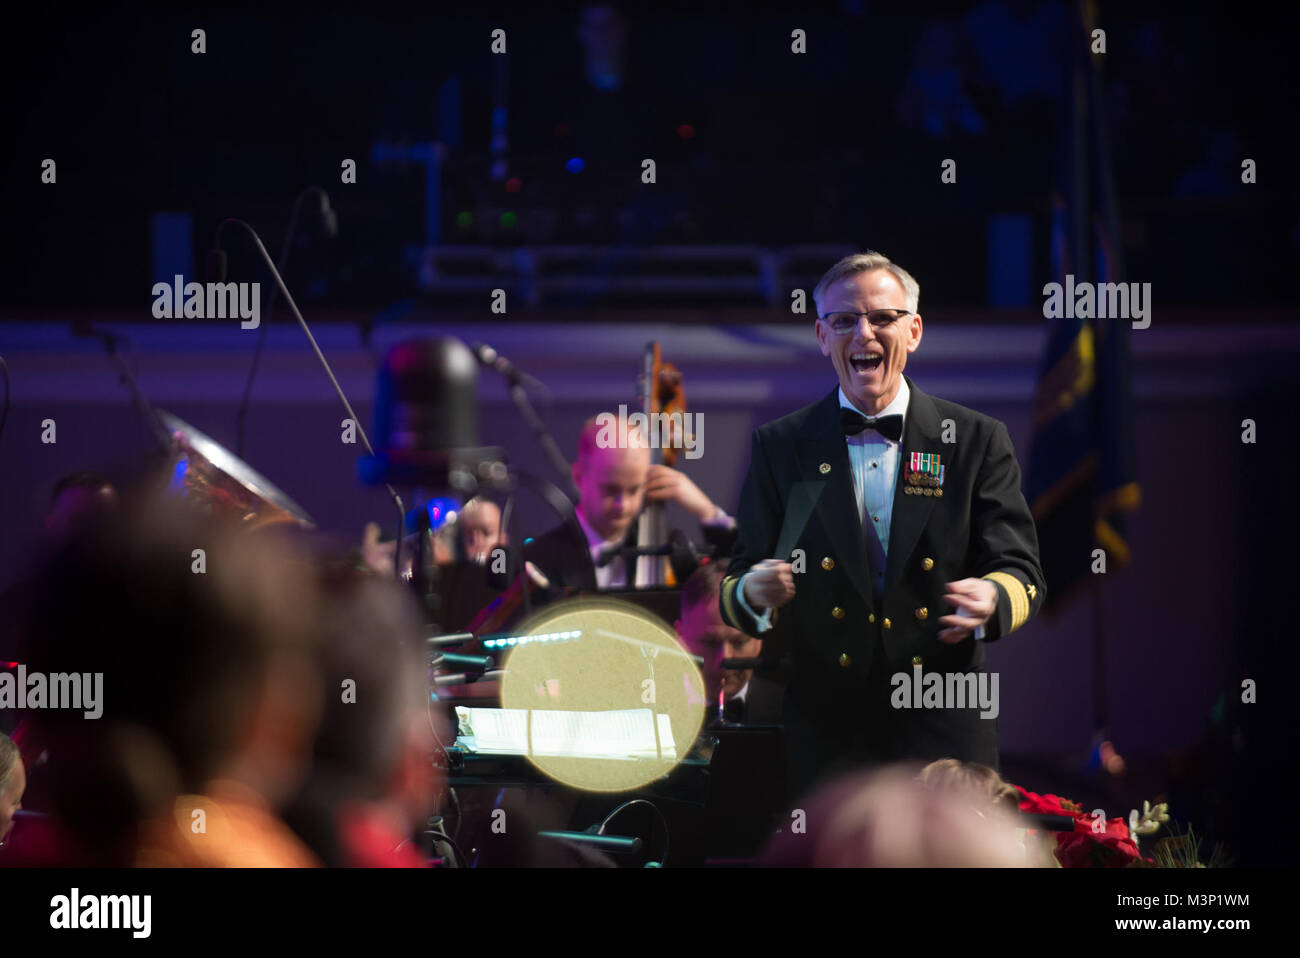 171216-N-VV903-1042 WASHINGTON (Dec. 16, 2017) Captain Kenneth Collins leads the  U.S. Navy Band during a holiday concert at DAR Constitution Hall in Washington. The Navy Band hosted thousands of people from the Washington area as well as hundreds of senior Navy and government officials during its three annual holiday concerts. (U.S. Navy photo by Musician 1st Class David Aspinwall/Released) 171216-N-VV903-1042 by United States Navy Band Stock Photo